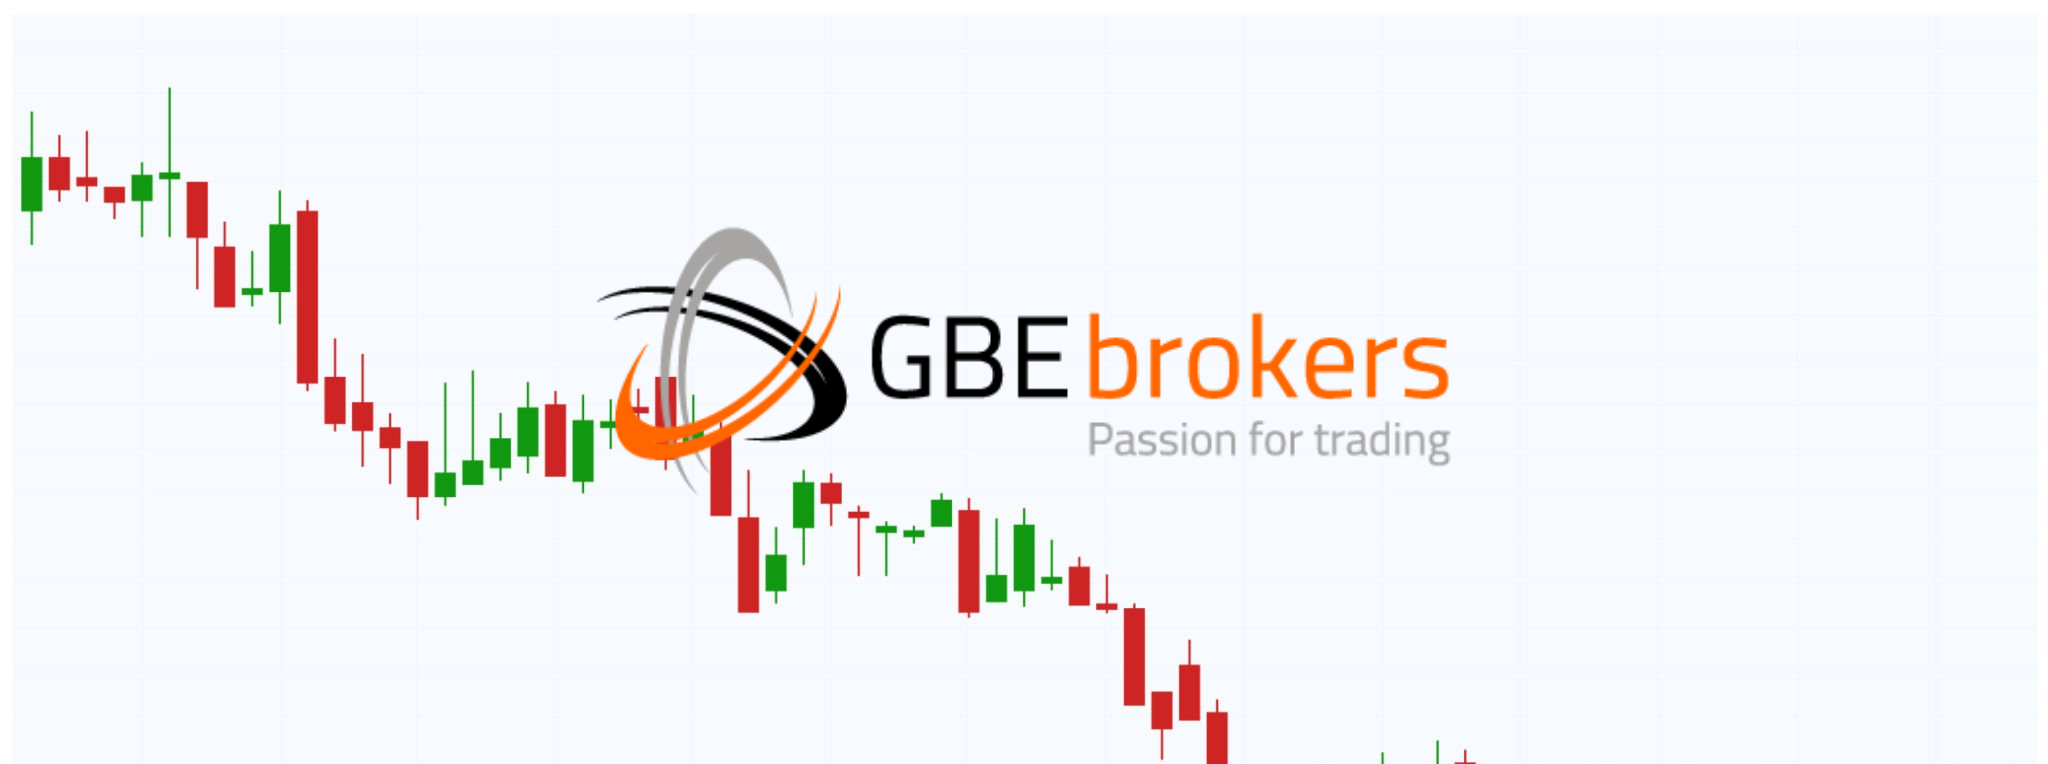 German forex and CFD broker GBE Brokers has integrated with the popular TradingView charting and analysis platform to enhance its offering for clients.